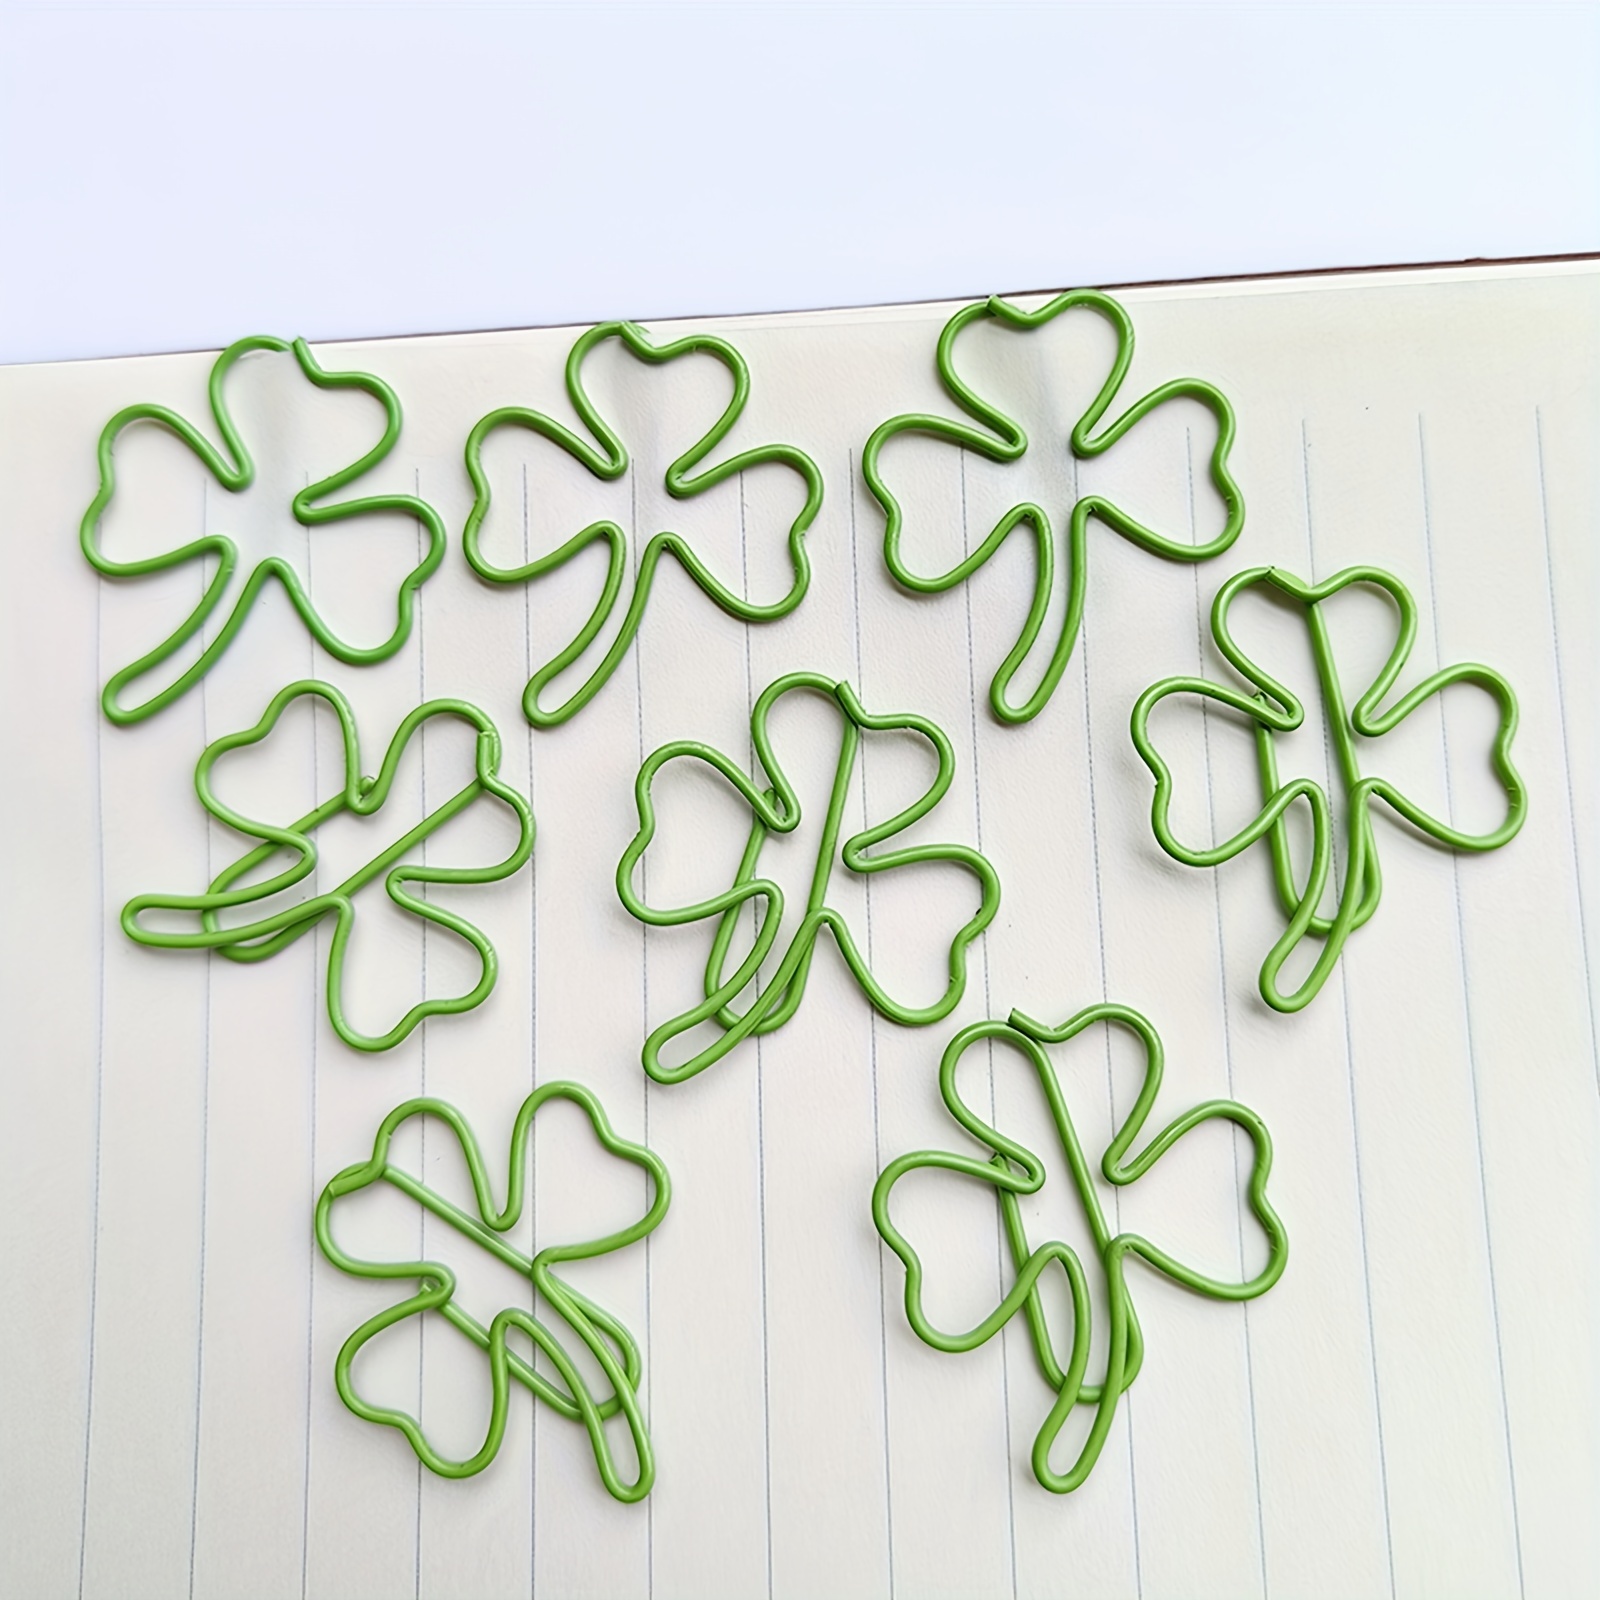 

20pcs Green Lucky Clover Paperclip Creative Shaped Bookmark Clip For Office And Study